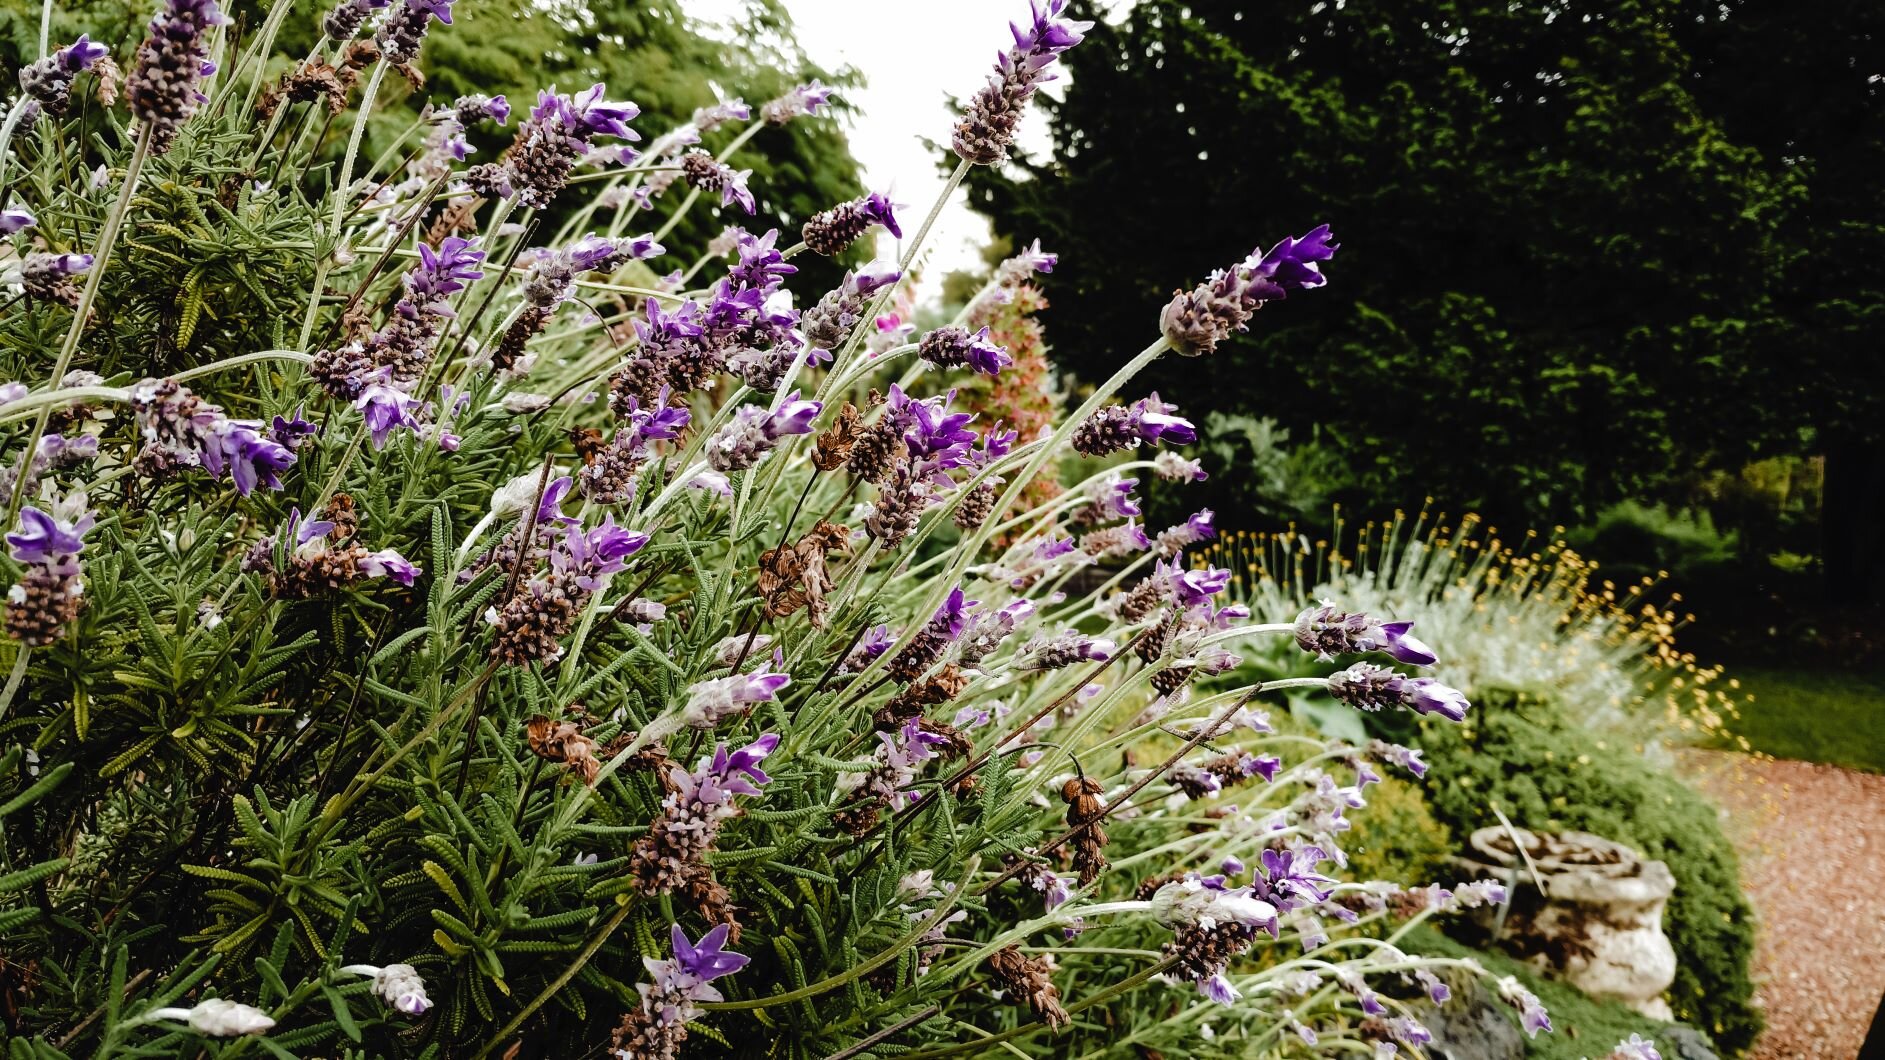 A bush or lavender plants in bloom - their purple spiky blossoms reach towards the right of the frame.